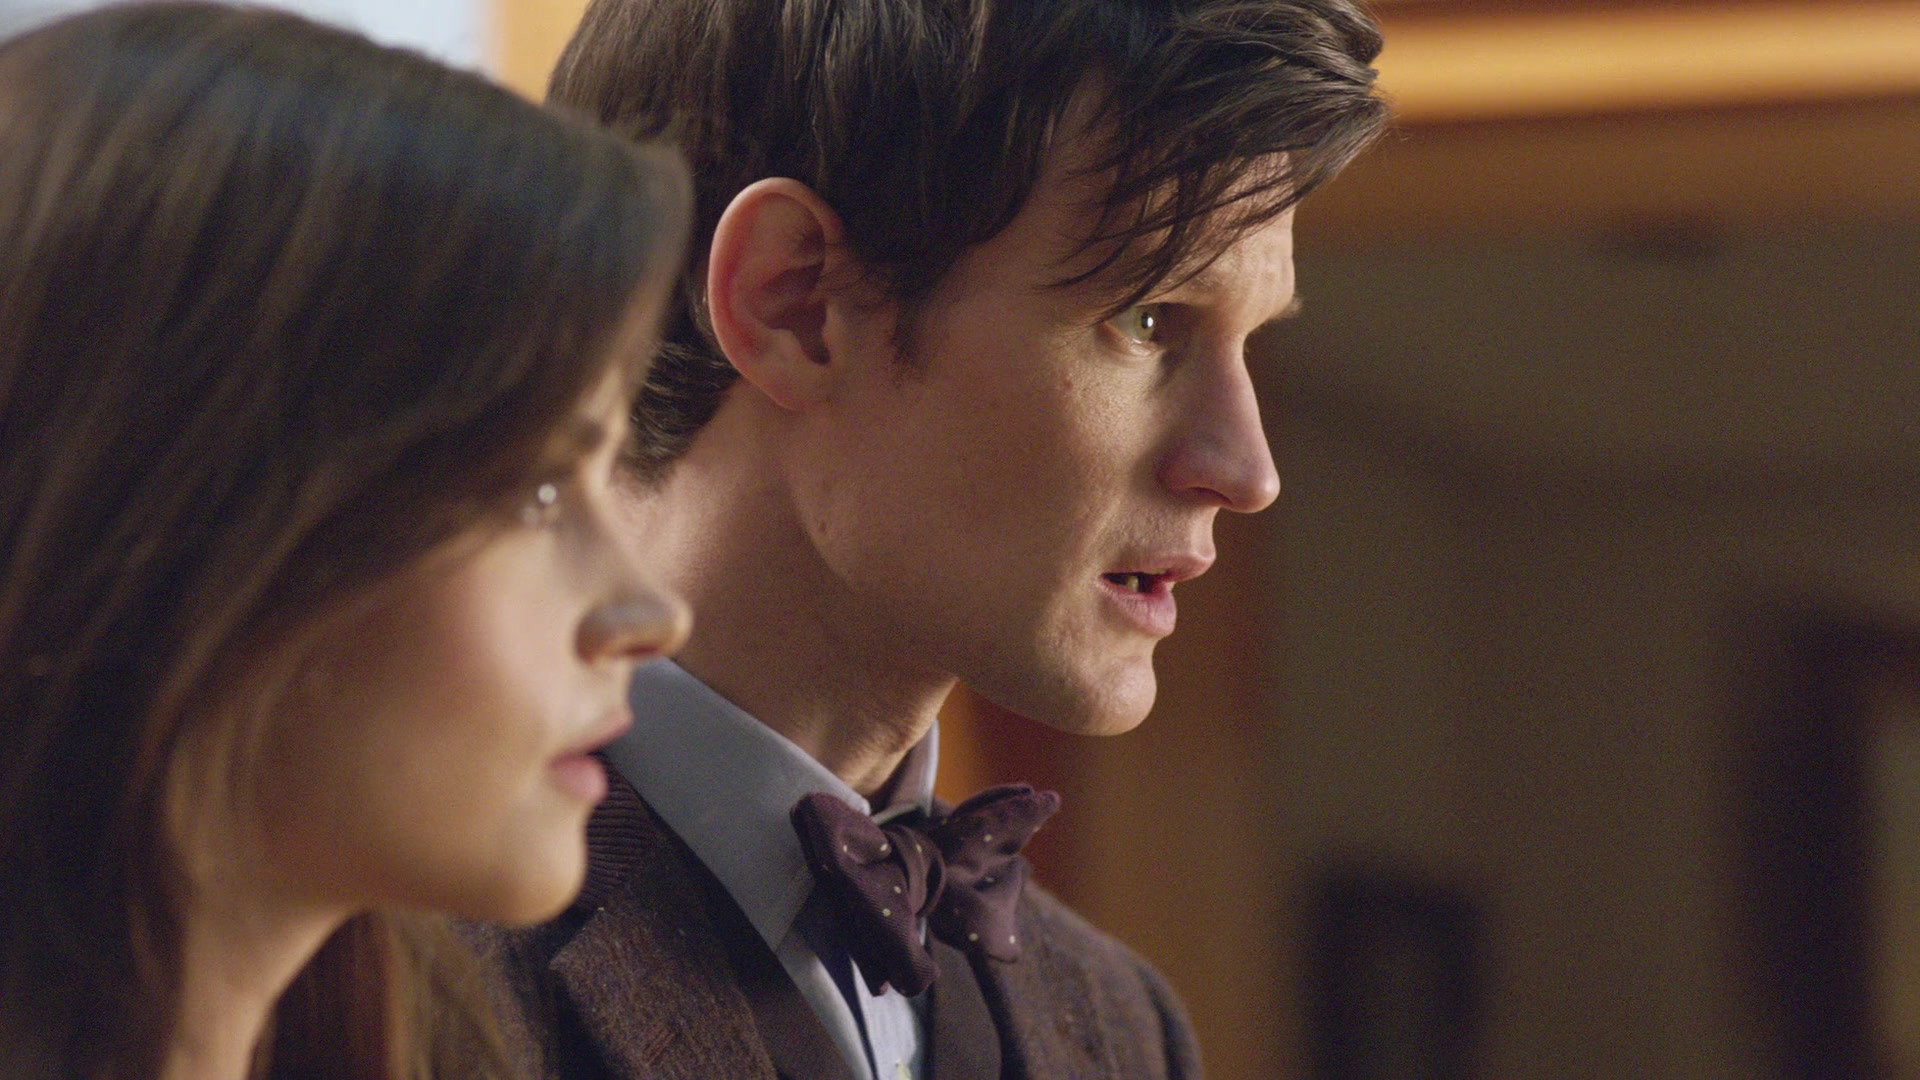 DayOfTheDoctor-Caps-0202.jpg